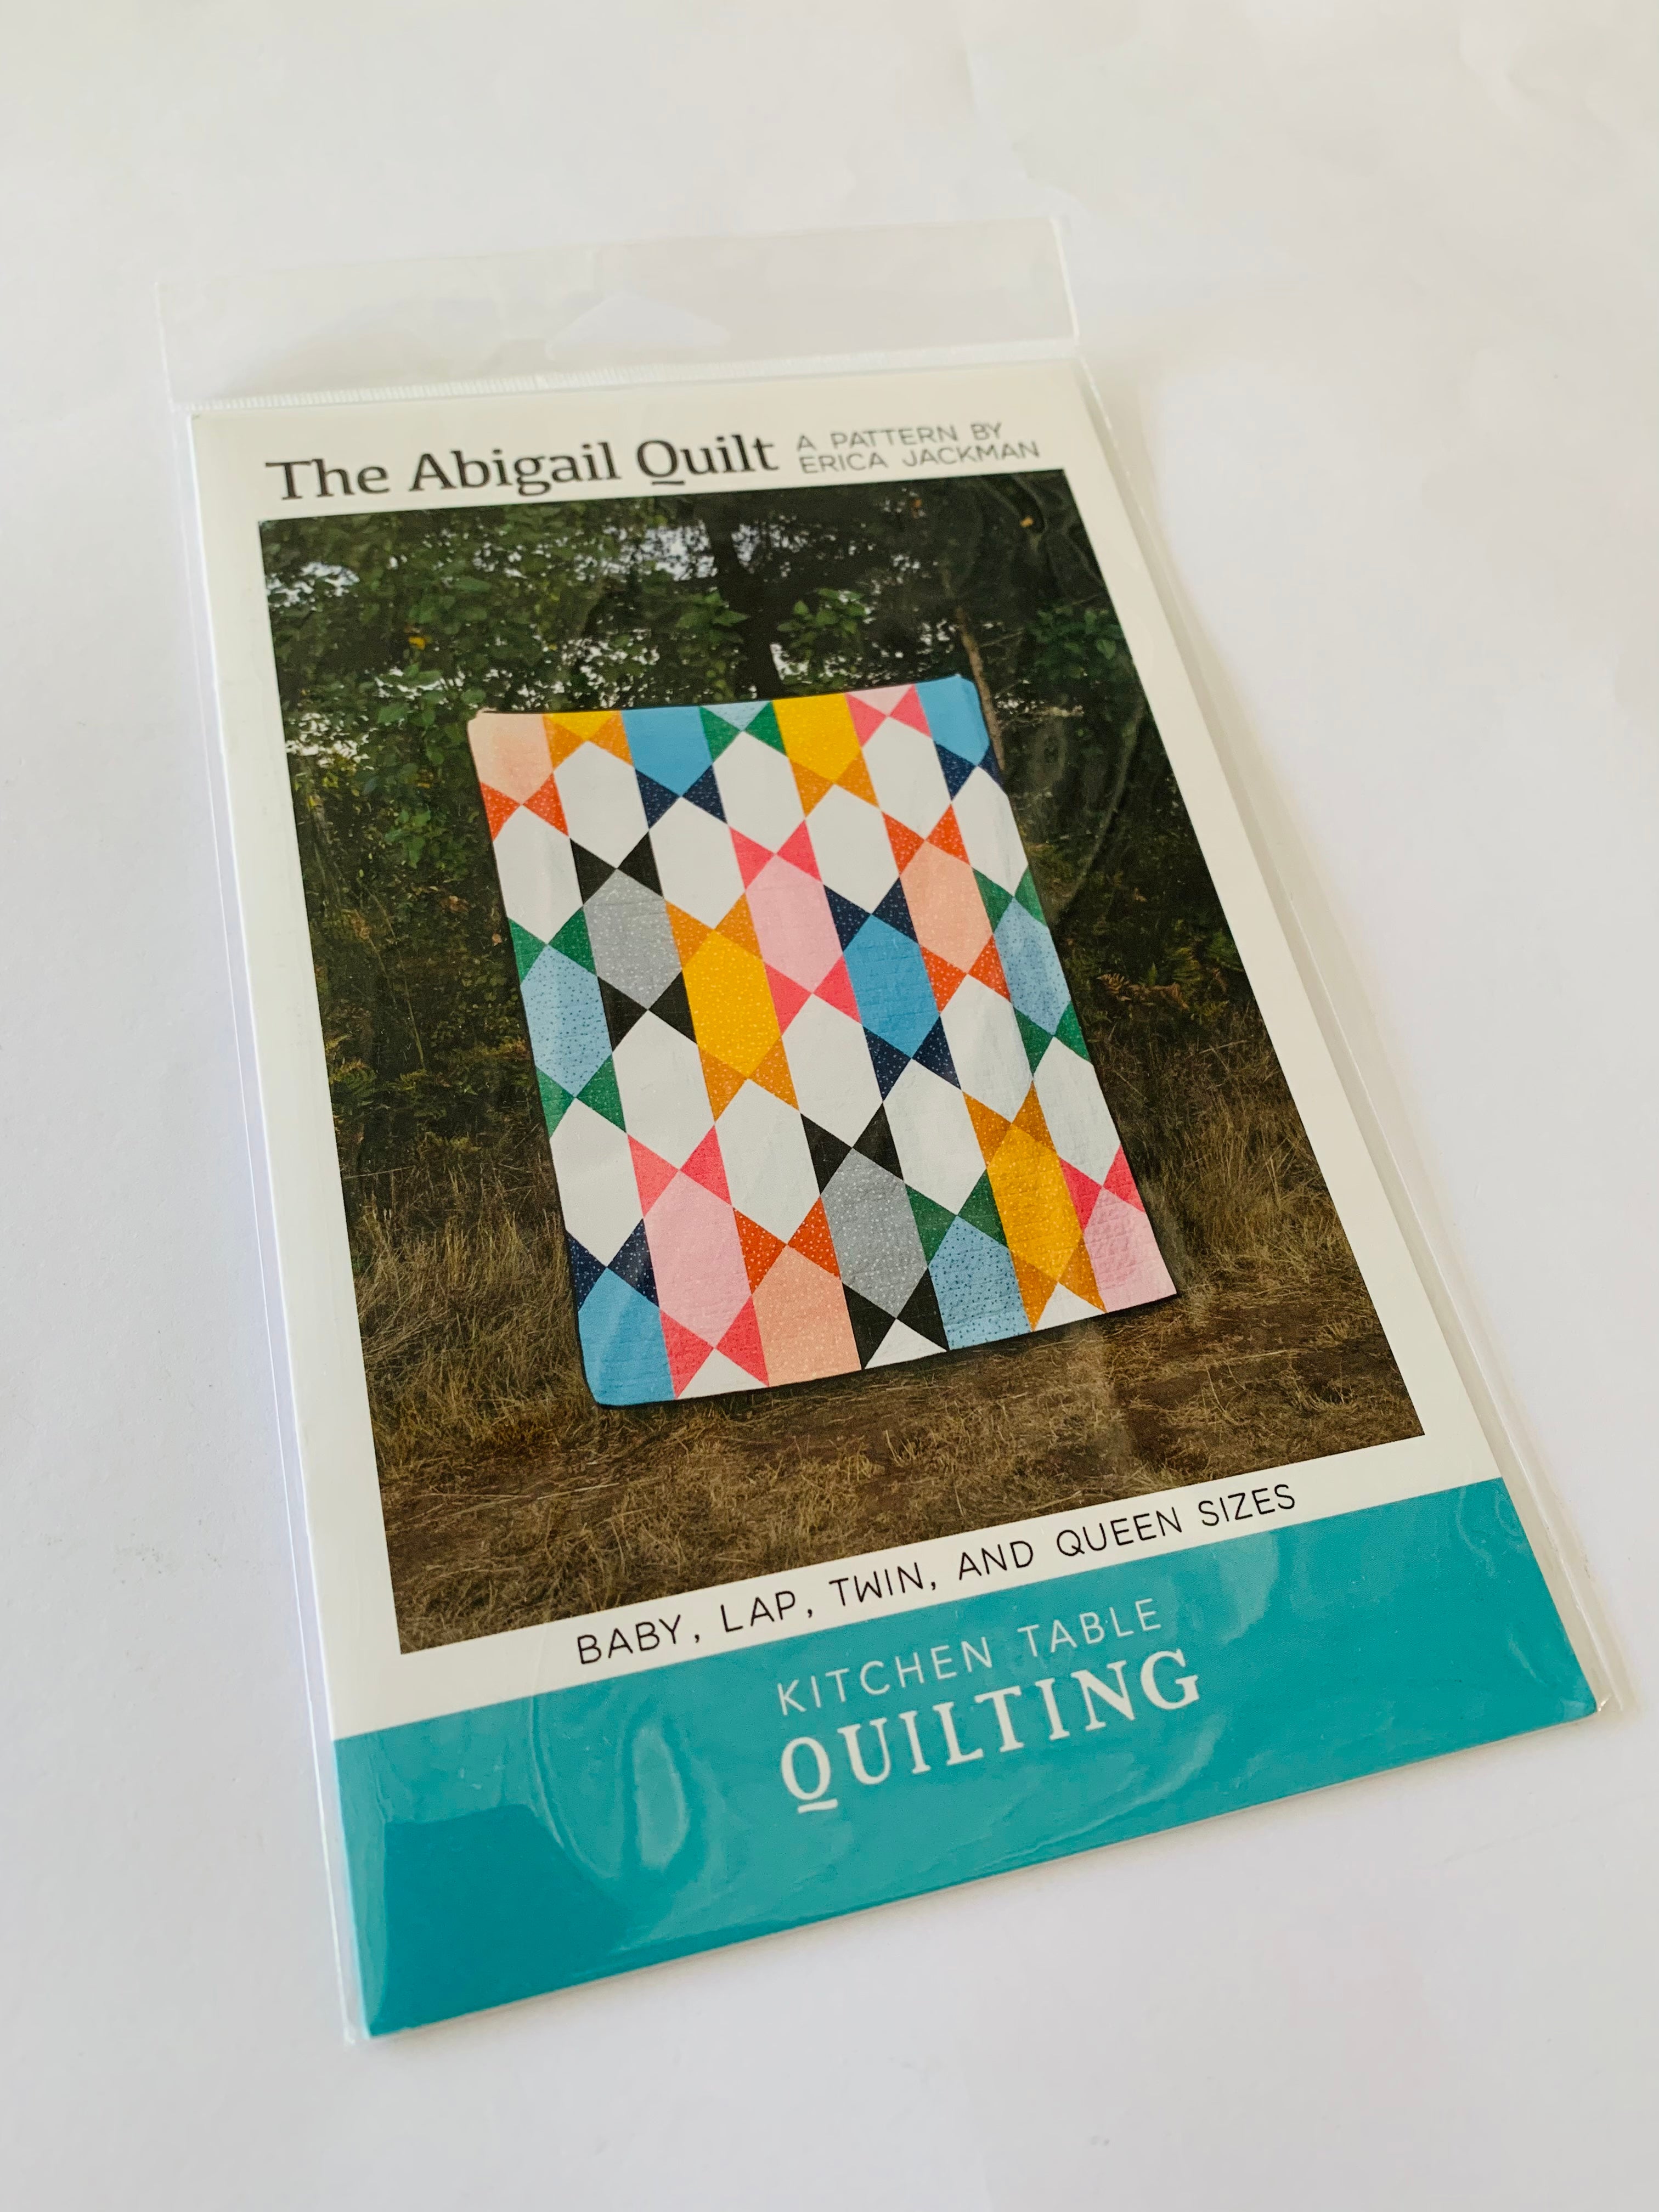 The Abigail Quilt Pattern by Erica Jackman